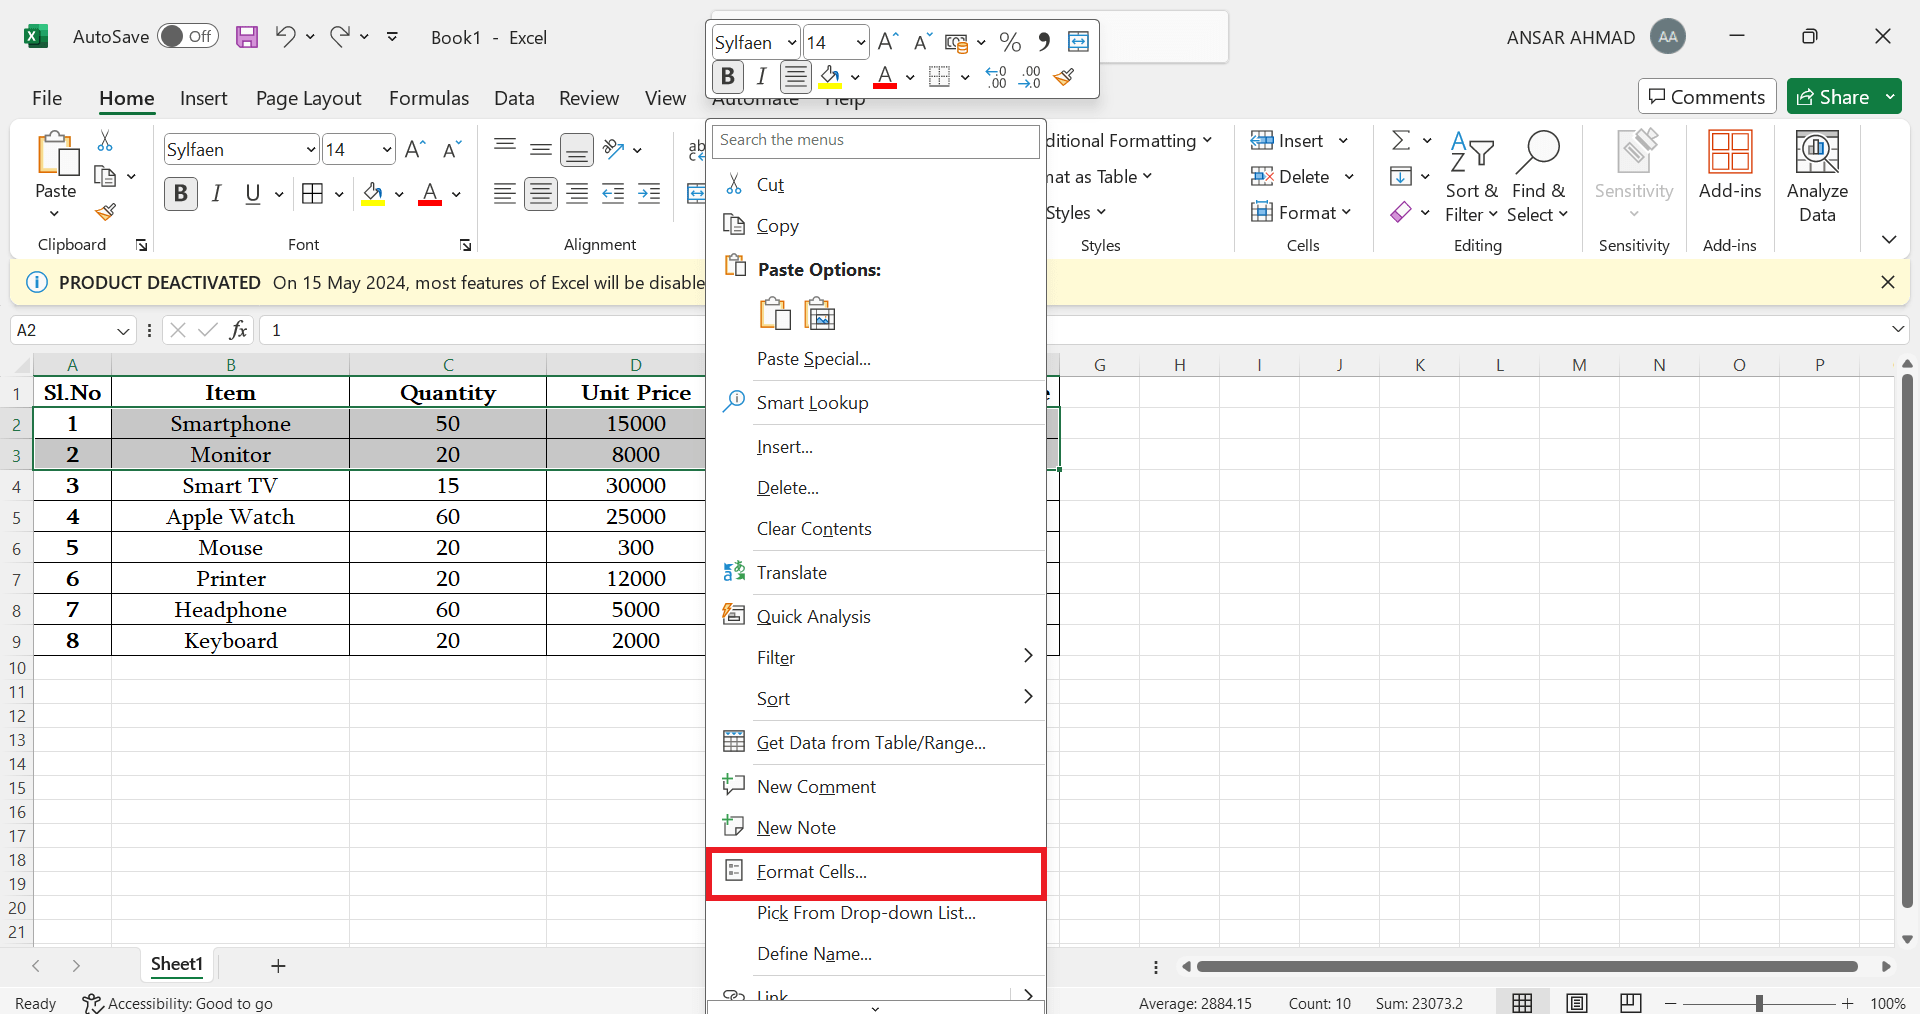 Select Format Cells option